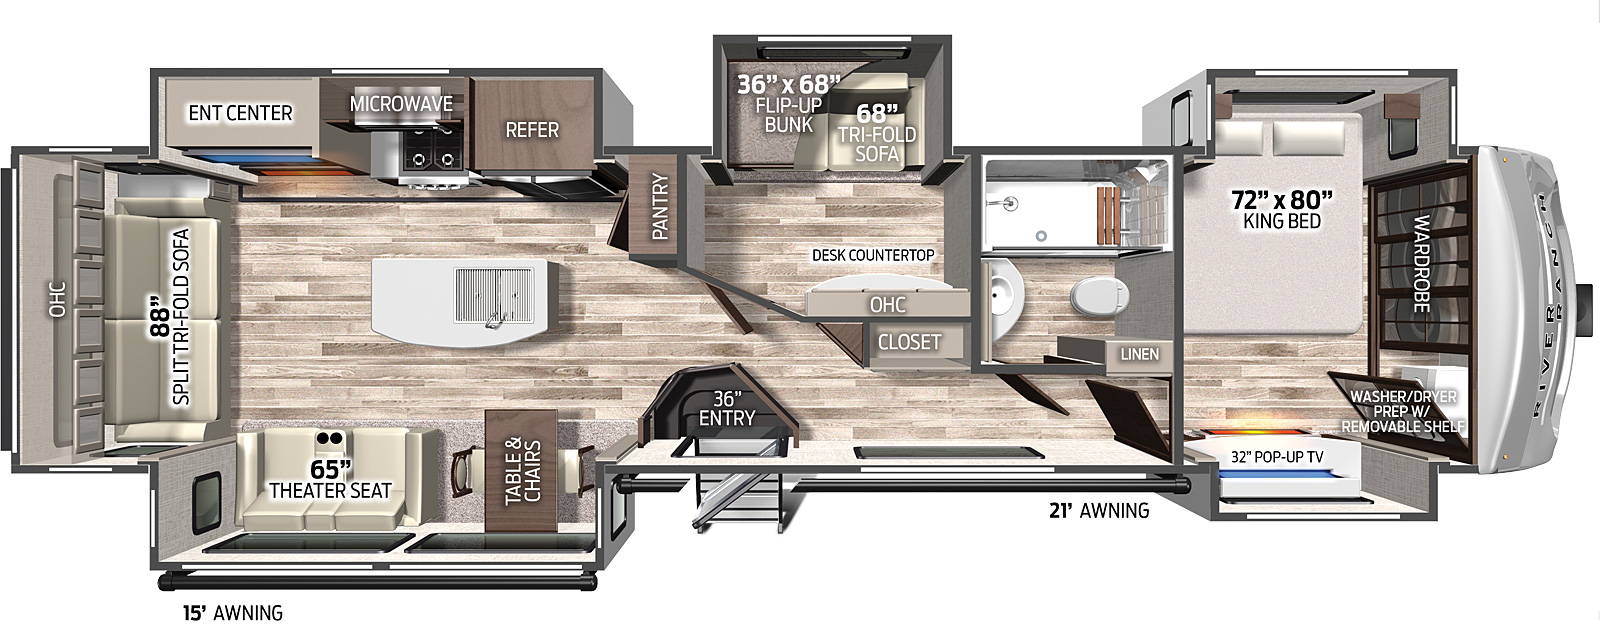 The 392MB has 5 slide outs, 3 on the road side and two on the camp side, along with one entry door on the camp side. Interior layout from front to back: front bedroom with king size bed in the road-side slide out and TV entertainment and dresser in the camp side slide out. Side aisle bathroom and bunk room with TV entertainment and cabinets, roadside slide out containing top bunk and pull-out sofa; The kitchen with island containing sink and residential fridge, oven and cook top in the roadside slide out; dinette with free standing chairs in the camp side slide out. The rear living room with sofa and roadside slide out containing entertainment center and theater seating in the camp side slide out. 